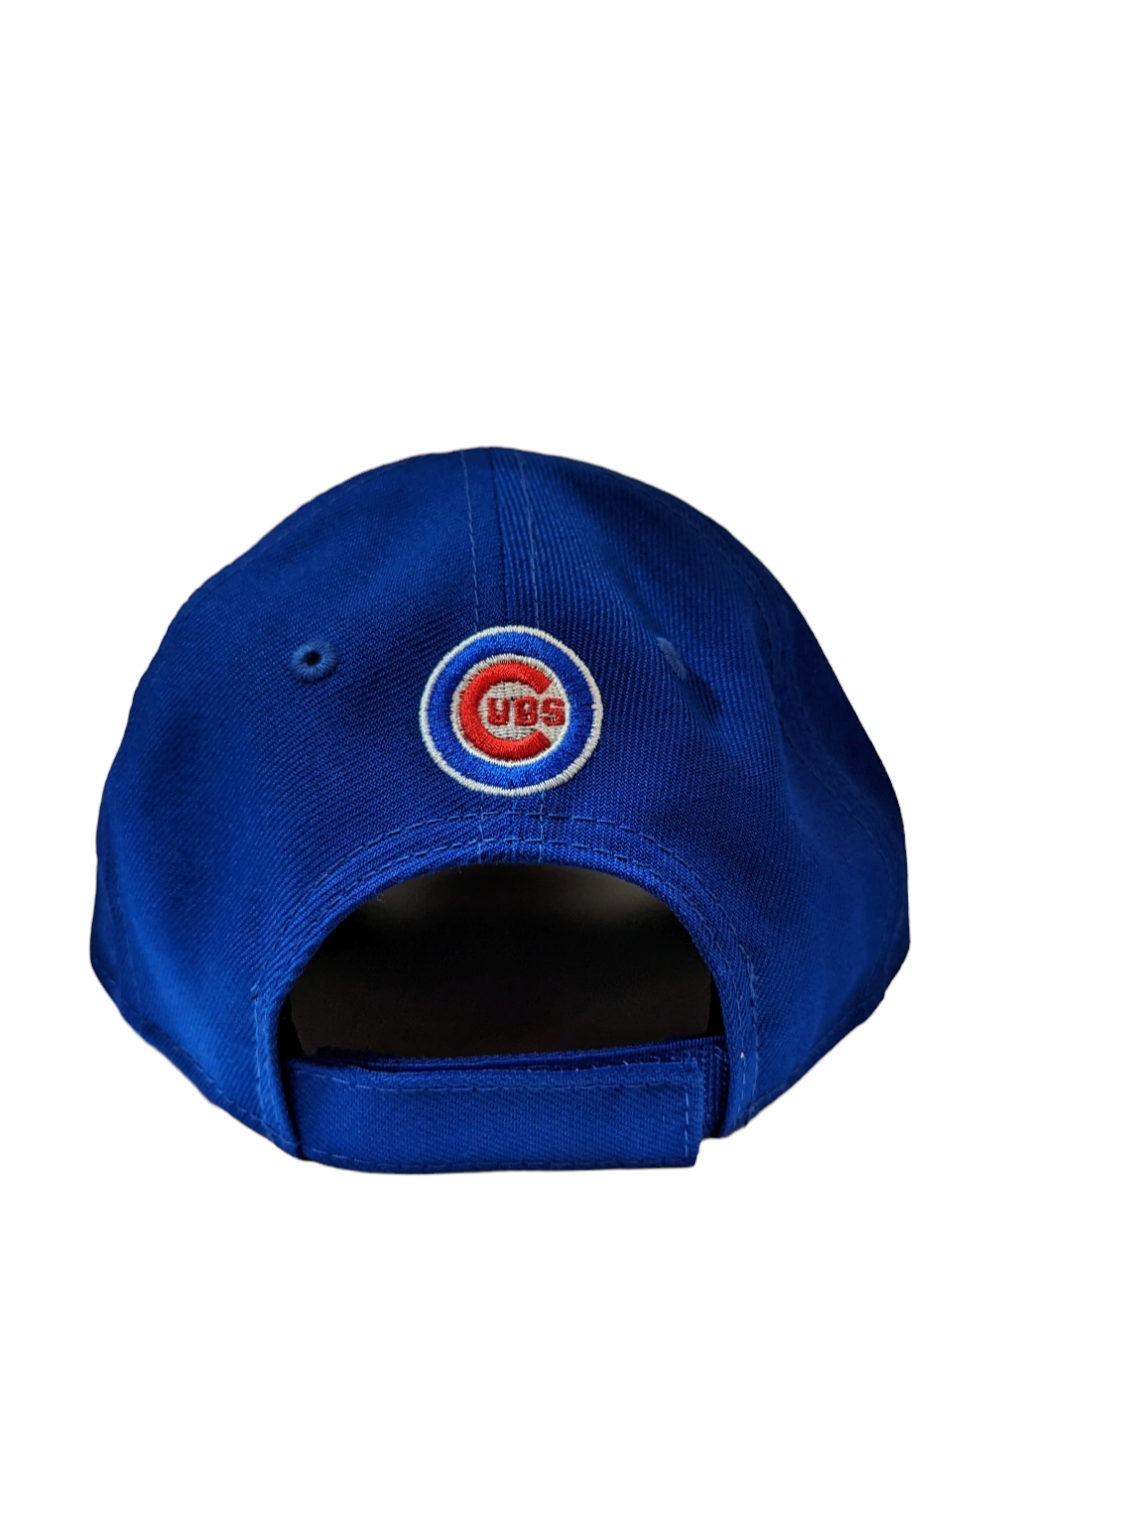 Kids Chicago Cubs Child The League Alternate Logo 9FORTY Adjustable Royal Cap By New Era